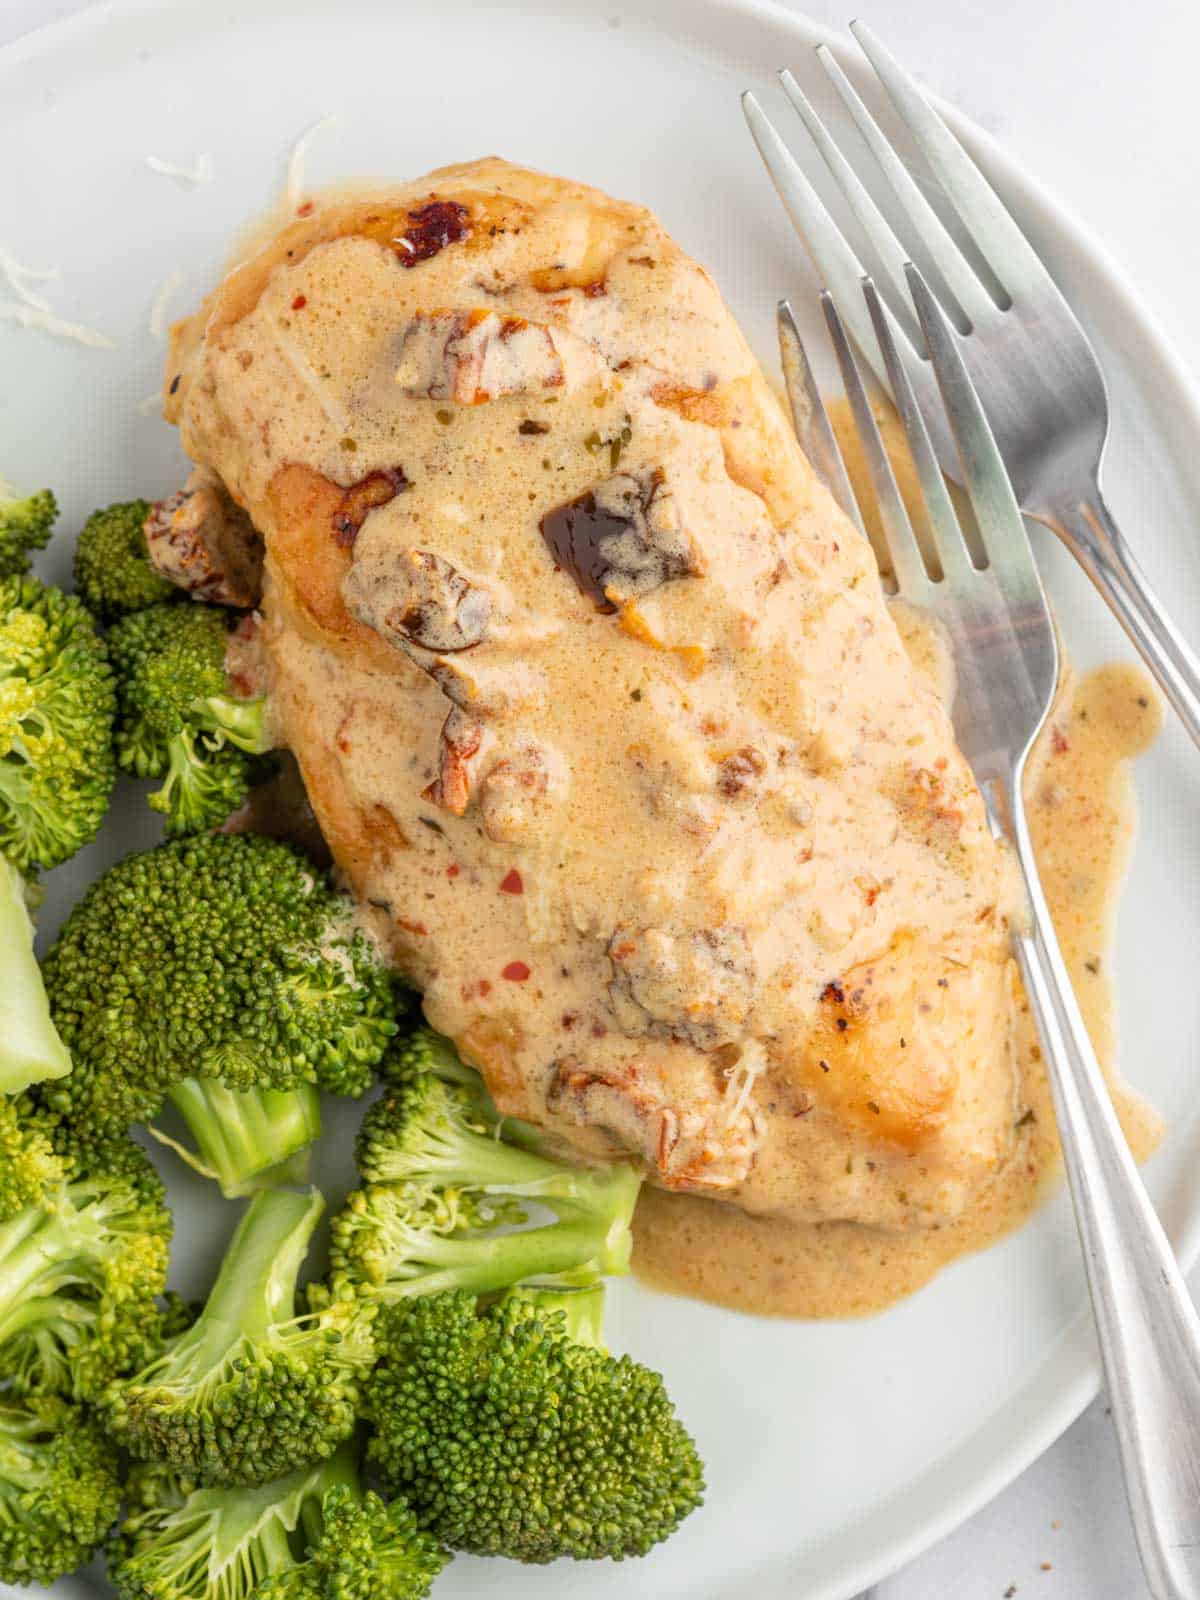 Creamy chicken recipe on a plate with broccoli and a fork.